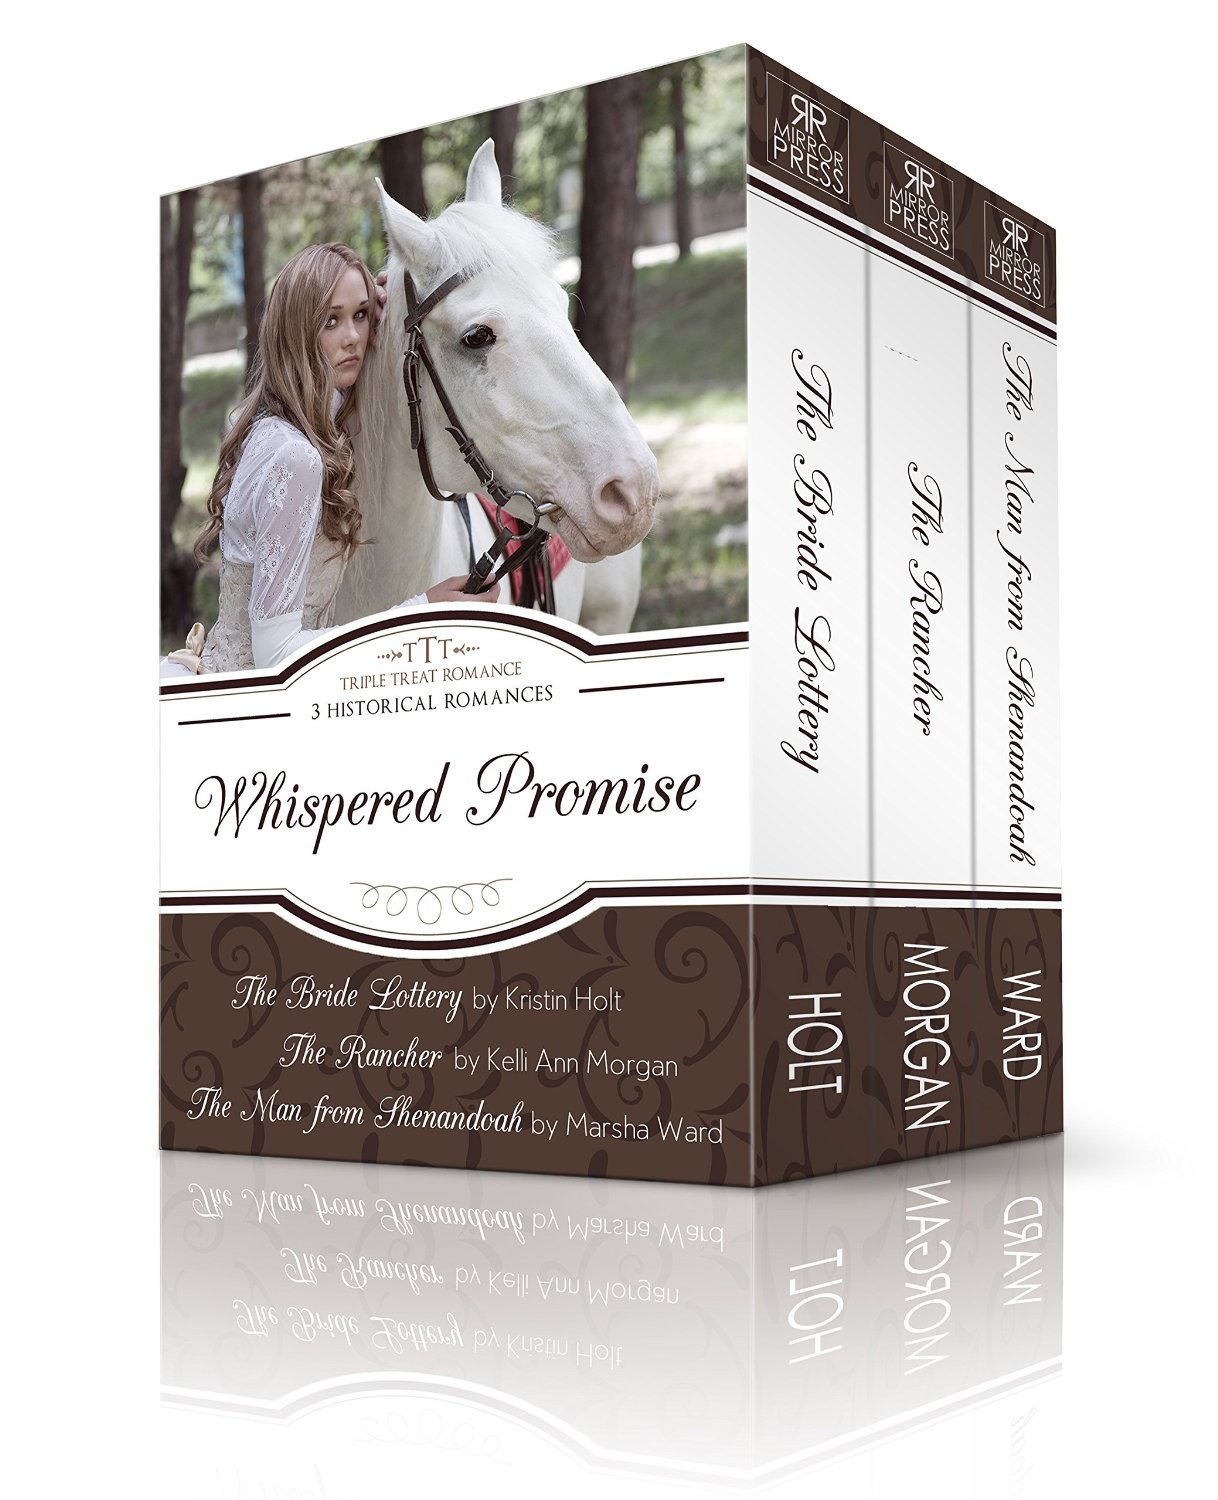 Kristin Holt | Whispered Promise SALE. Cover Art: Whispered Promise, A Triple Treat Romance, 3 Historical Romances including The Bride Lottery by Kristin Holt, The Rancher by Kelli Ann Morgan, and The Man from Shenandoah by Marsha Ward.